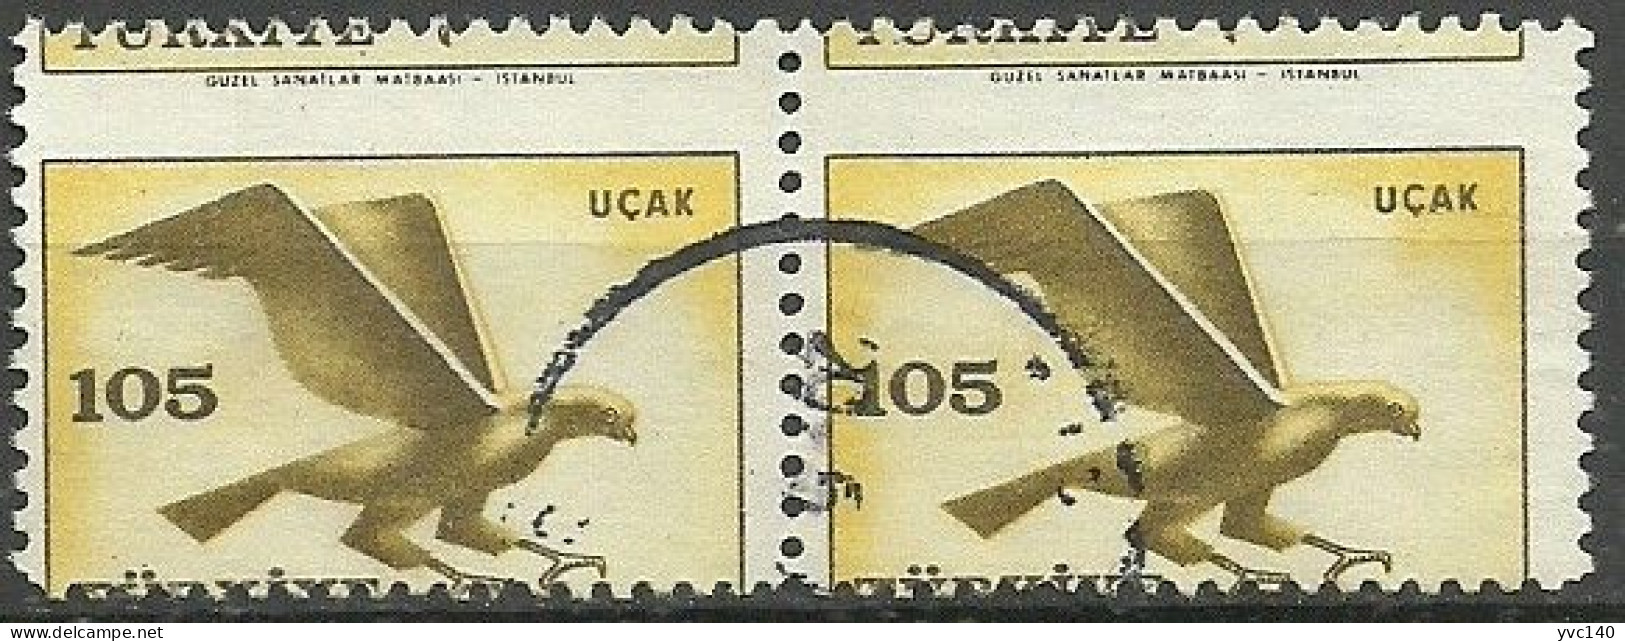 Turkey; 1959 Airmail Stamp 105 K. ERROR "Shifted Perf." - Used Stamps